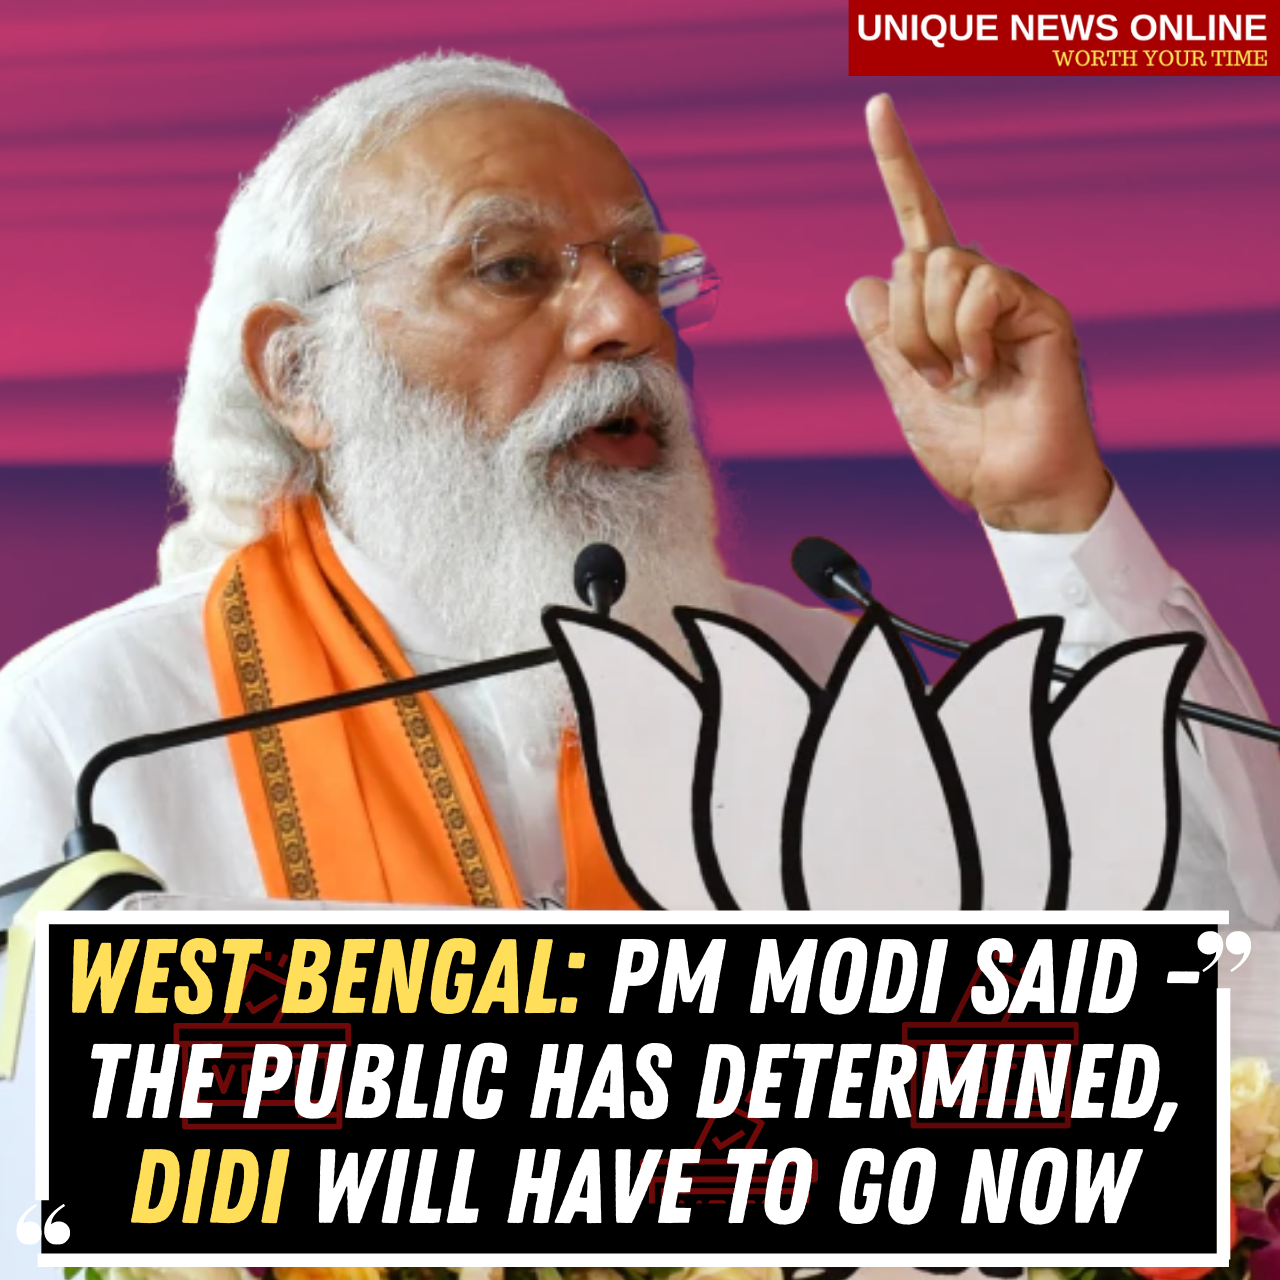 West Bengal: PM Modi said - The public has determined, Didi will have to go now